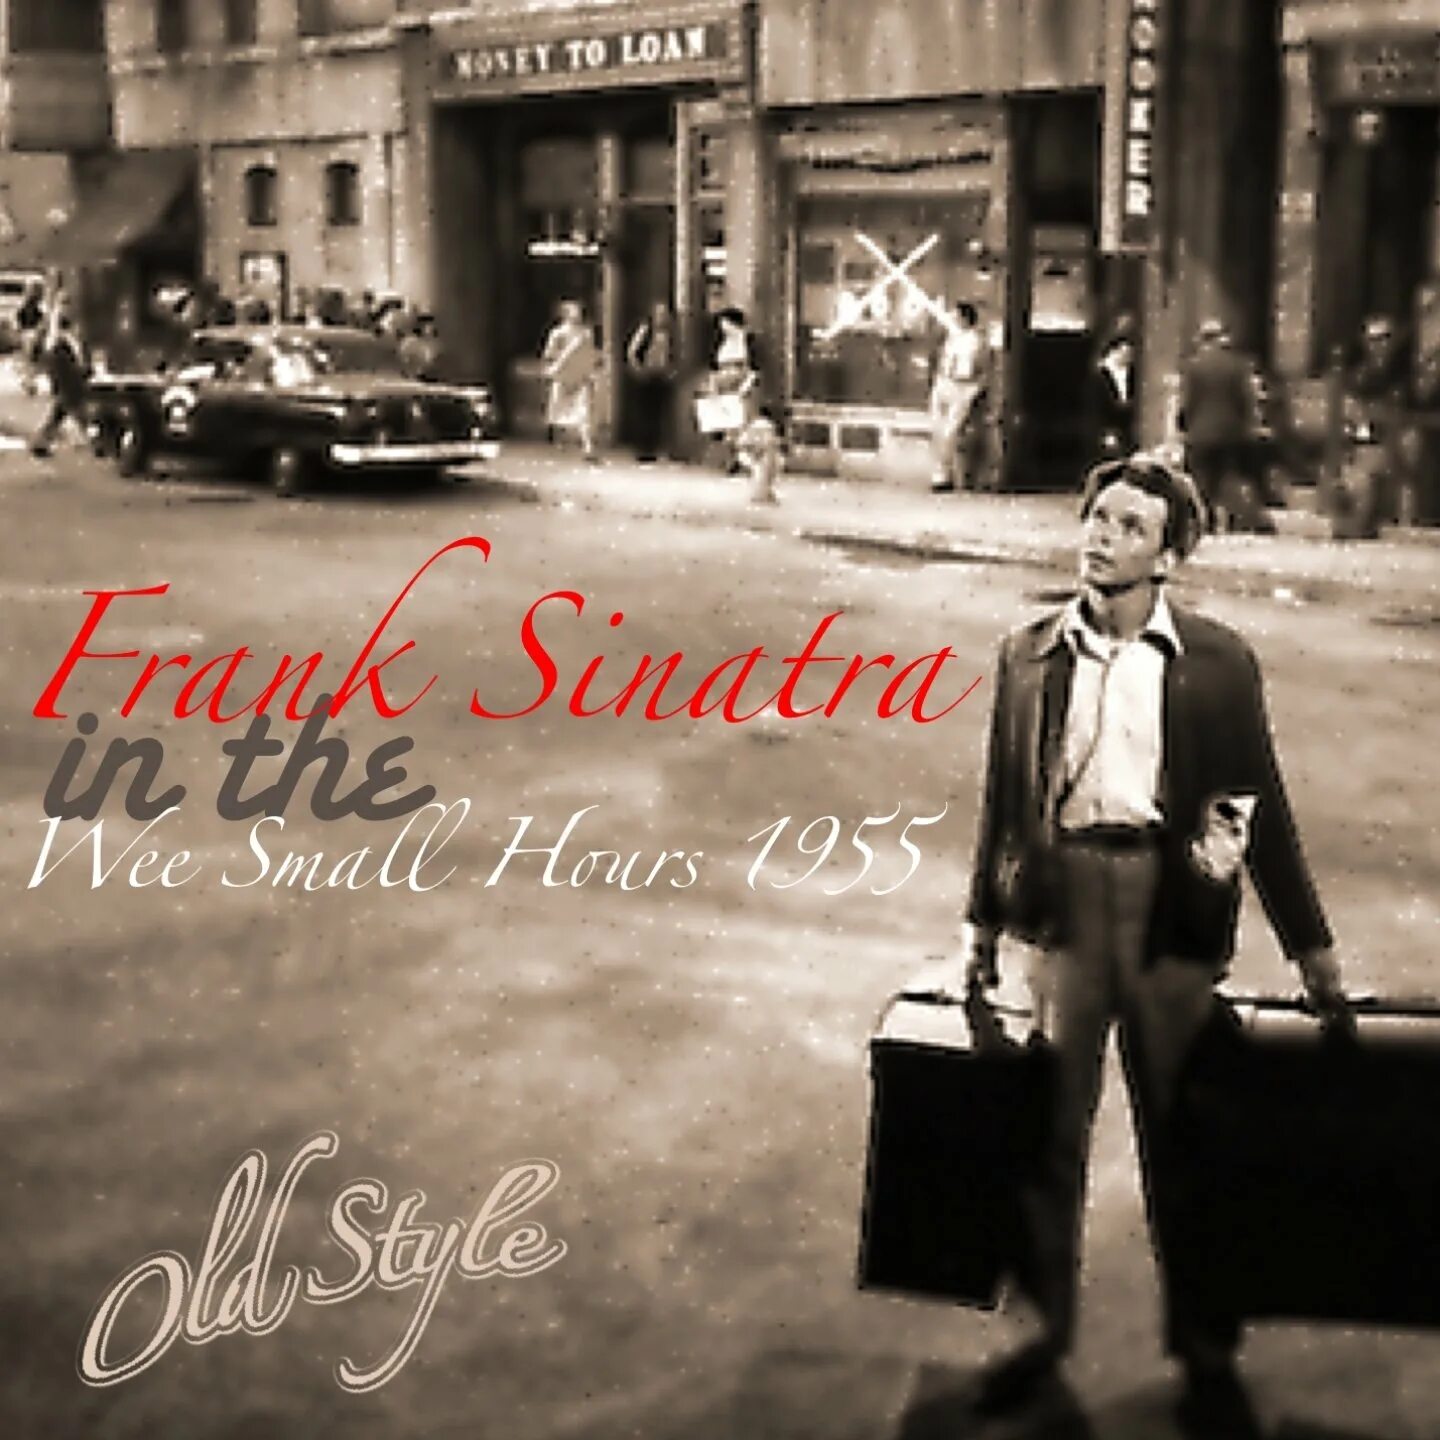 Frank Sinatra - in the Wee small hours (1955). Frank Sinatra - Sinatra: best of the best (2011). Frank Sinatra - Watertown. Frank Sinatra - it never entered my Mind. Small hours